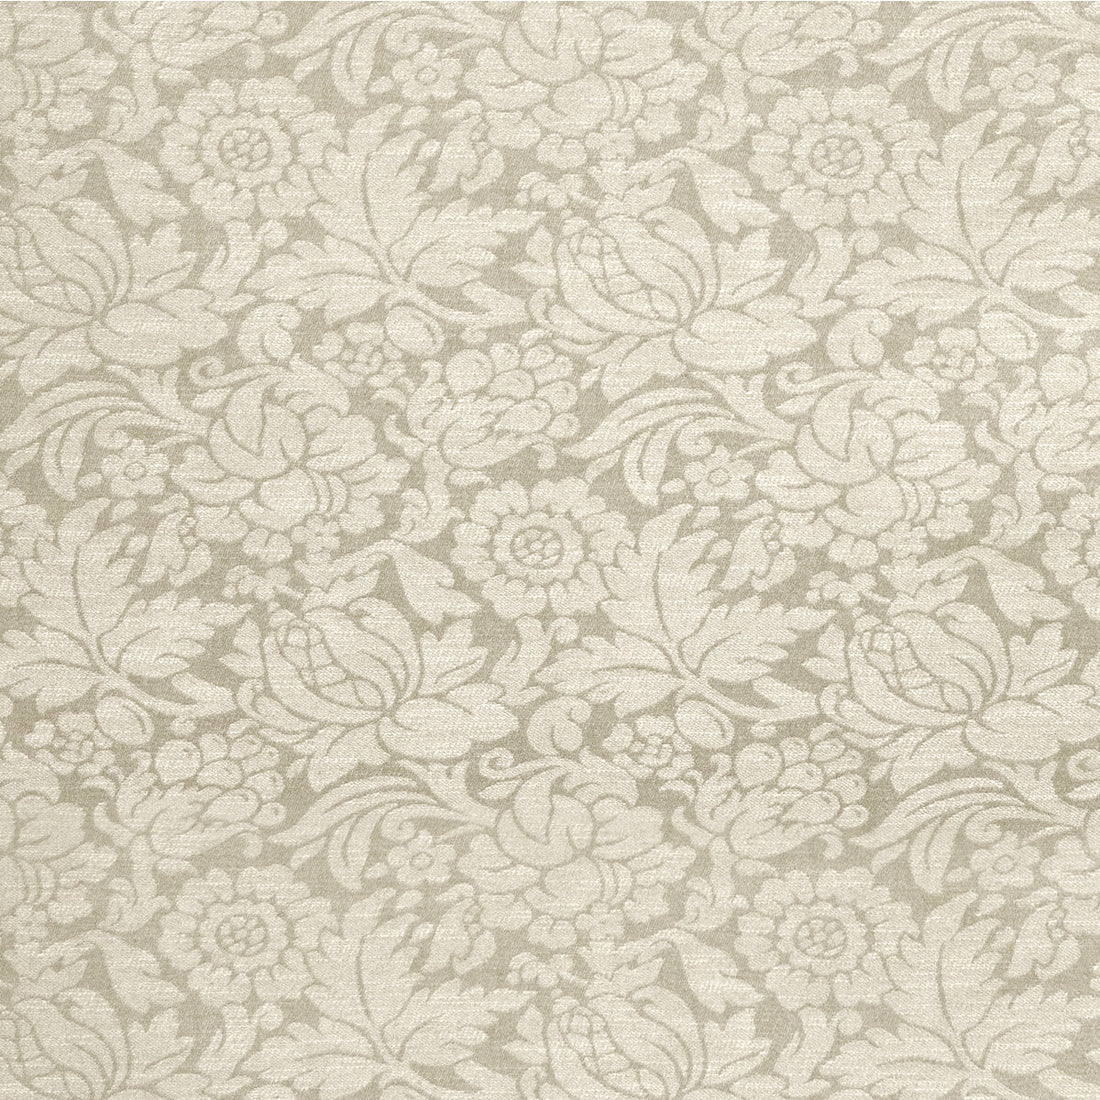 Shabby Damask fabric in linen color - pattern 36870.16.0 - by Kravet Couture in the Atelier Weaves collection